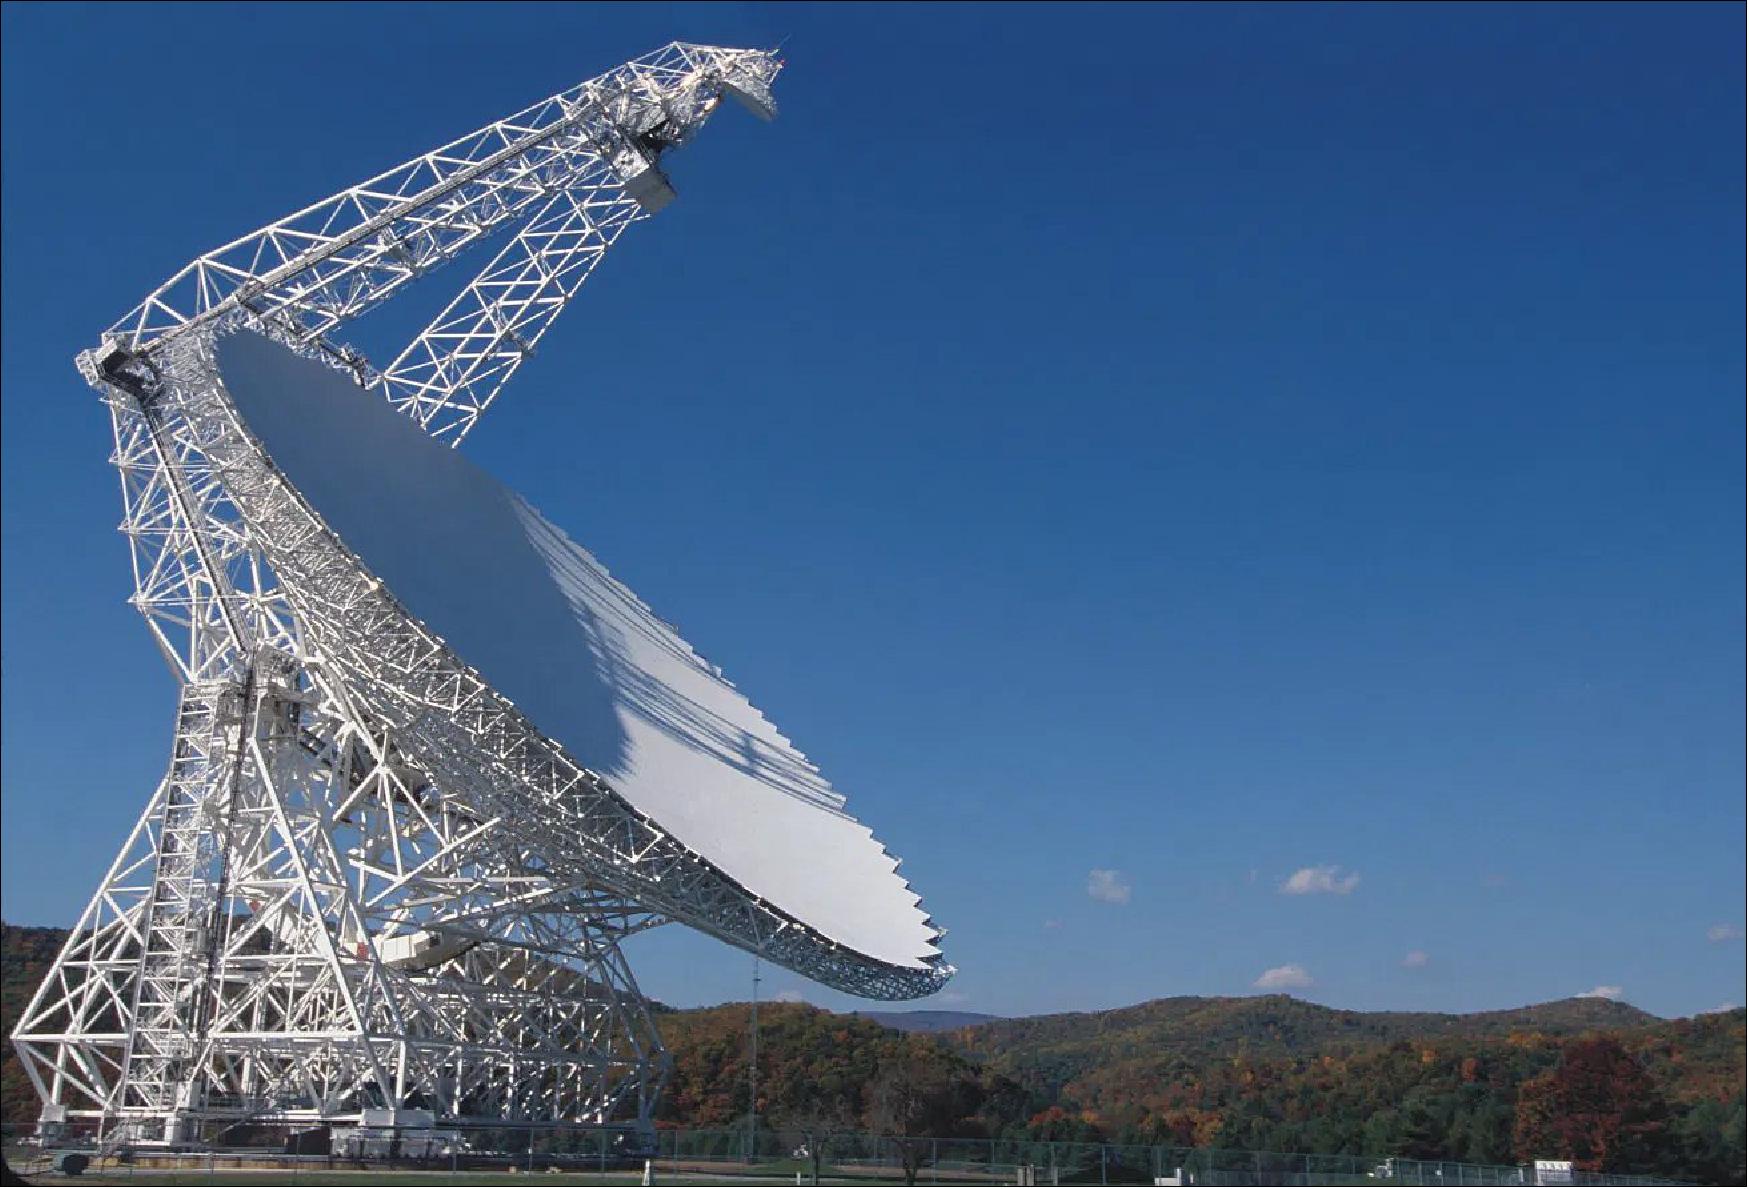 Figure 8: The 100 m diameter Robert C. Byrd GBT (Green Bank Telescope) is the worlds largest steerable telescope, it is ~148 m tall with a mass of 7711 tons, the dish covers an area of 9300 m2 (image credit: NRAO)